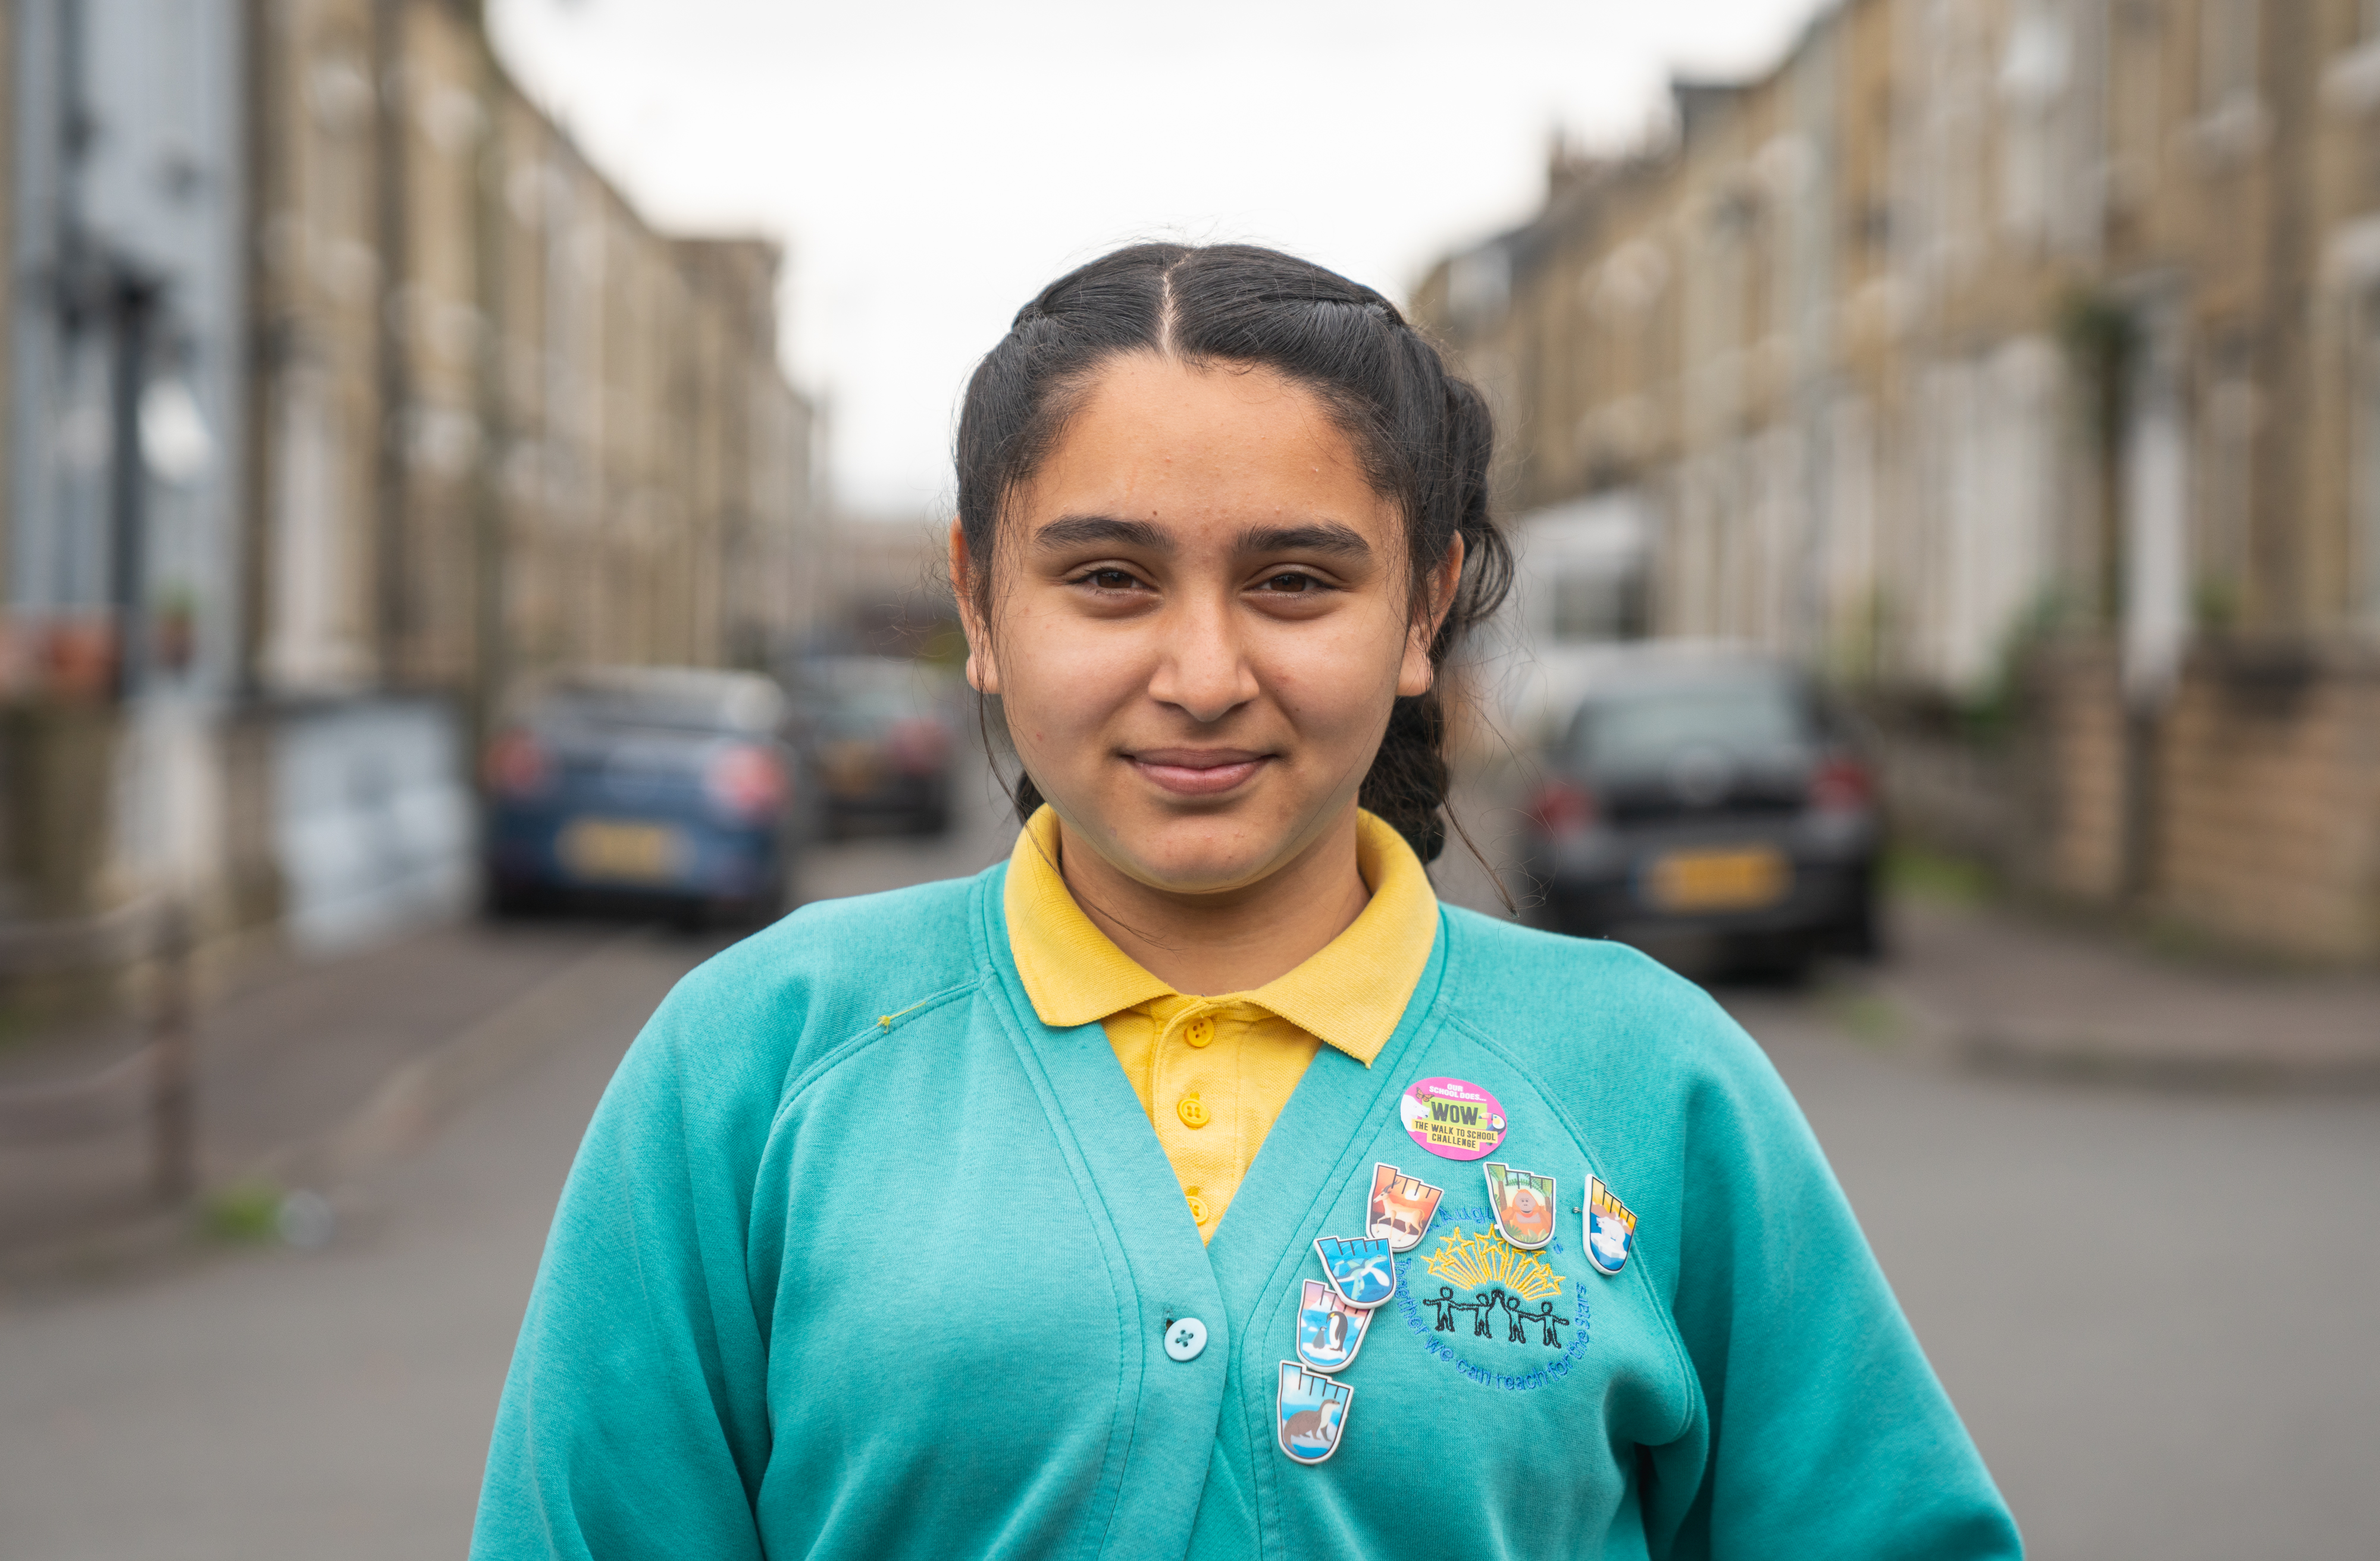 an Asian girl in school uniform wearing badges on her cardigan stands on a street and smiles